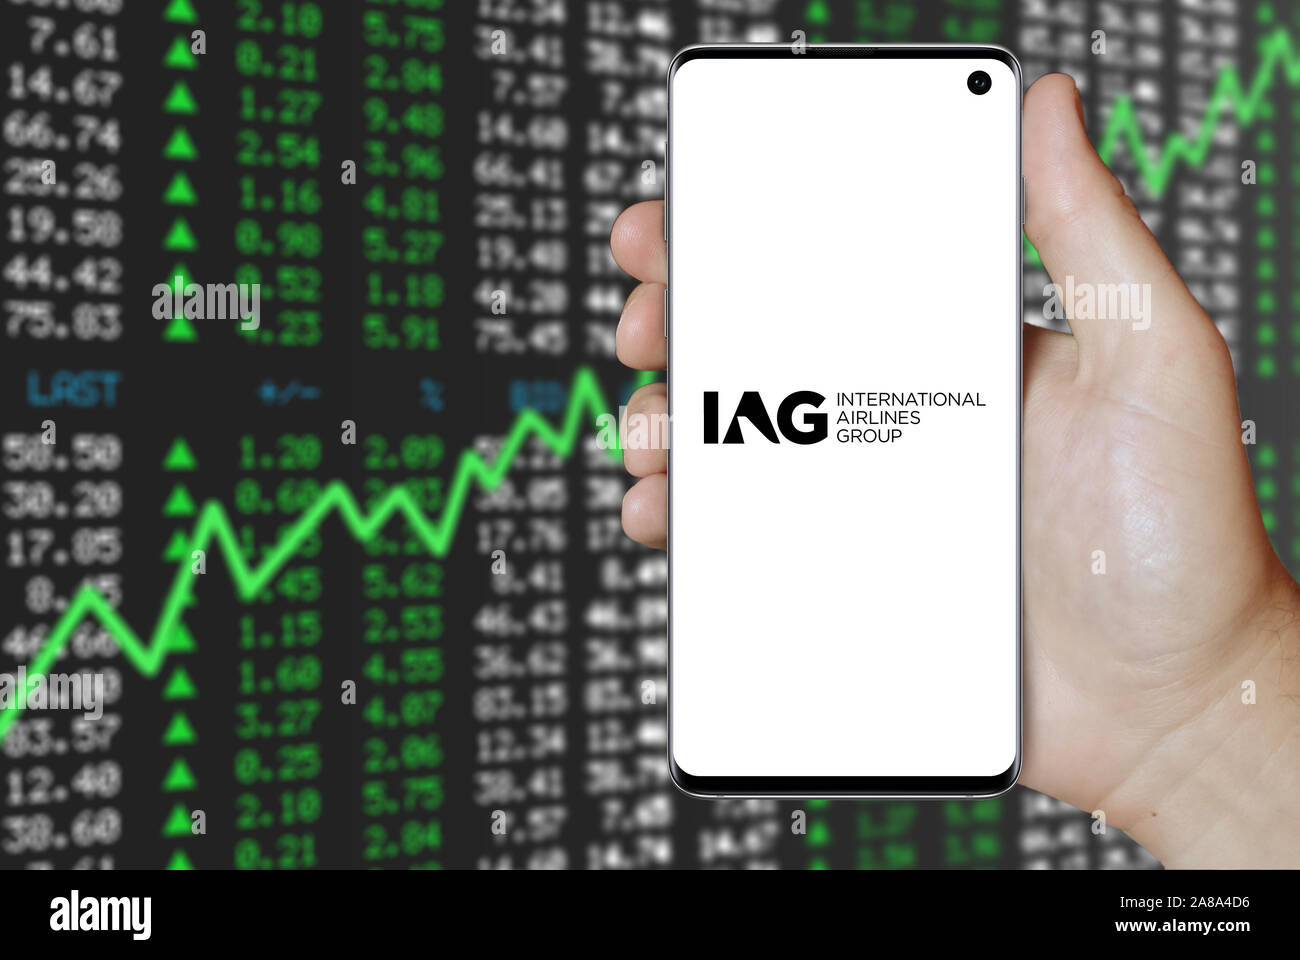 Logo of public company International Airlines Group displayed on a smartphone. Positive stock market background. Credit: PIXDUCE Stock Photo